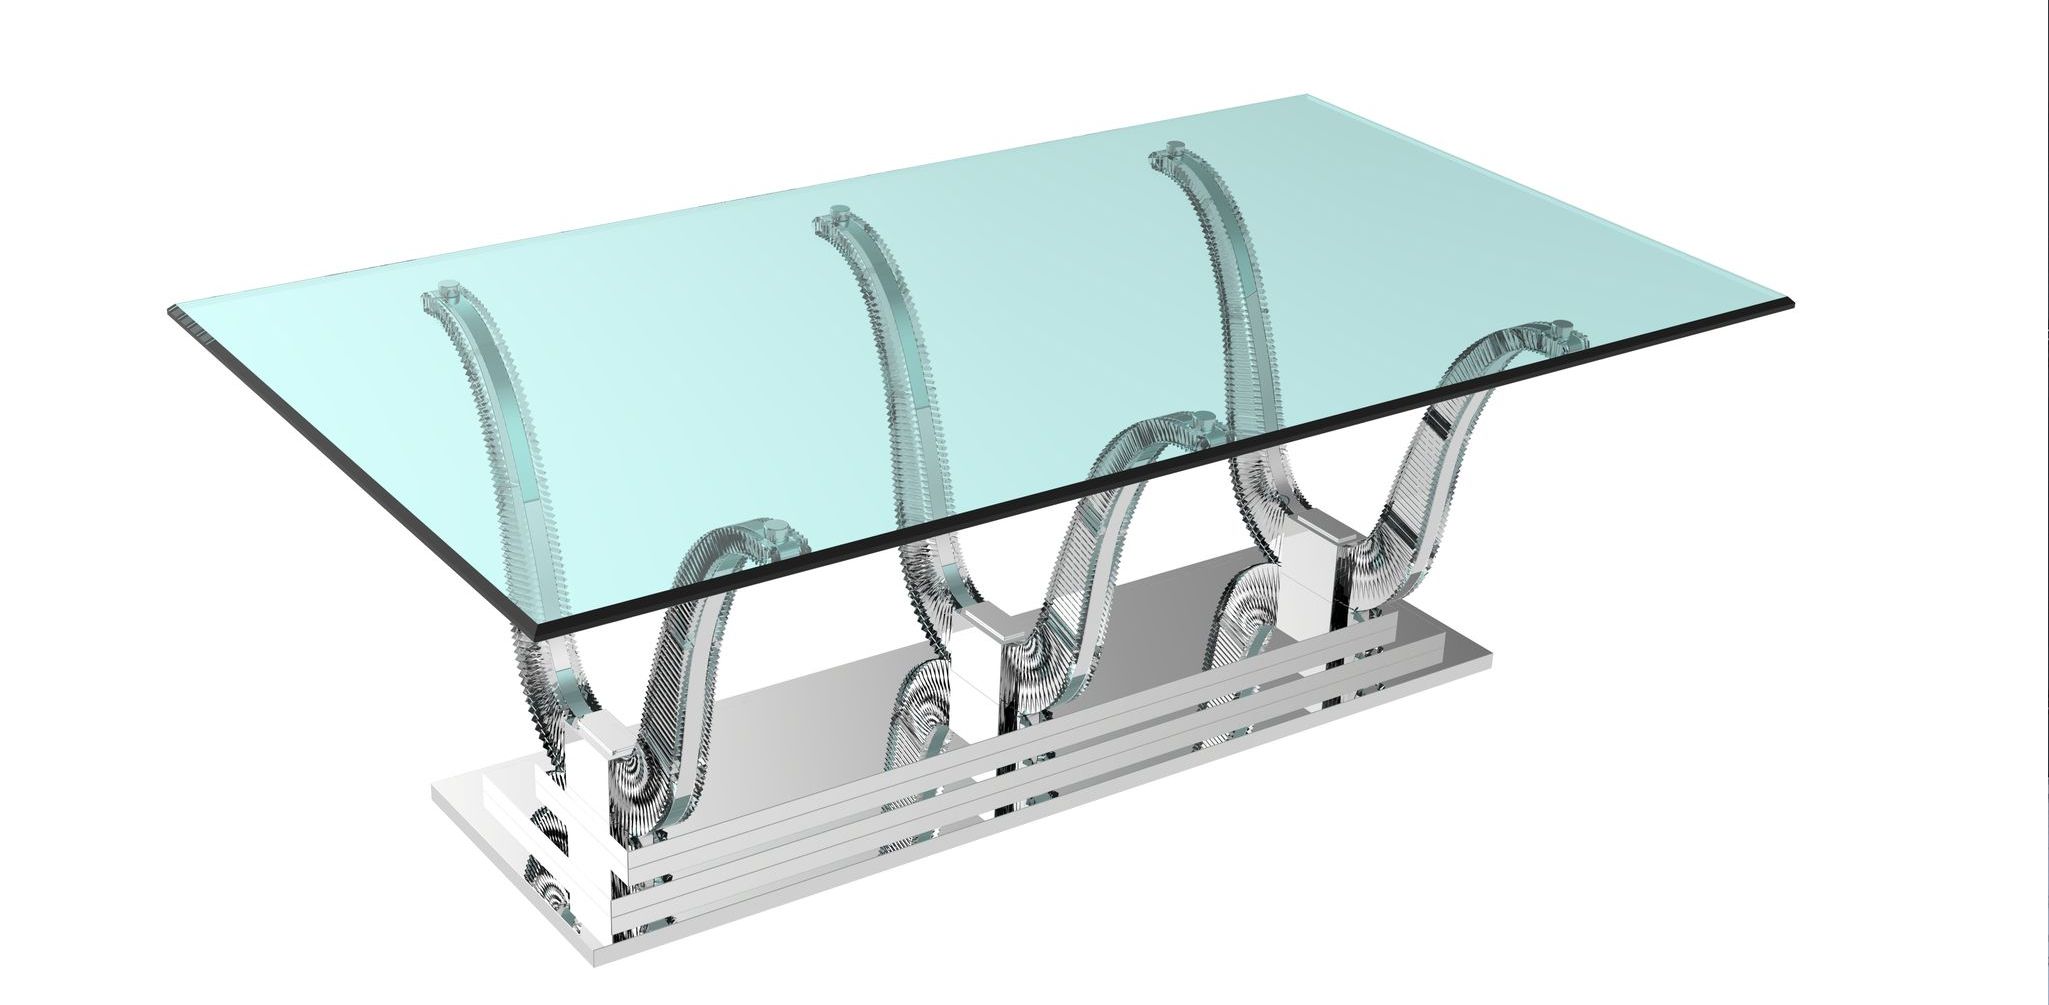 Metal and glass Harp table on white background